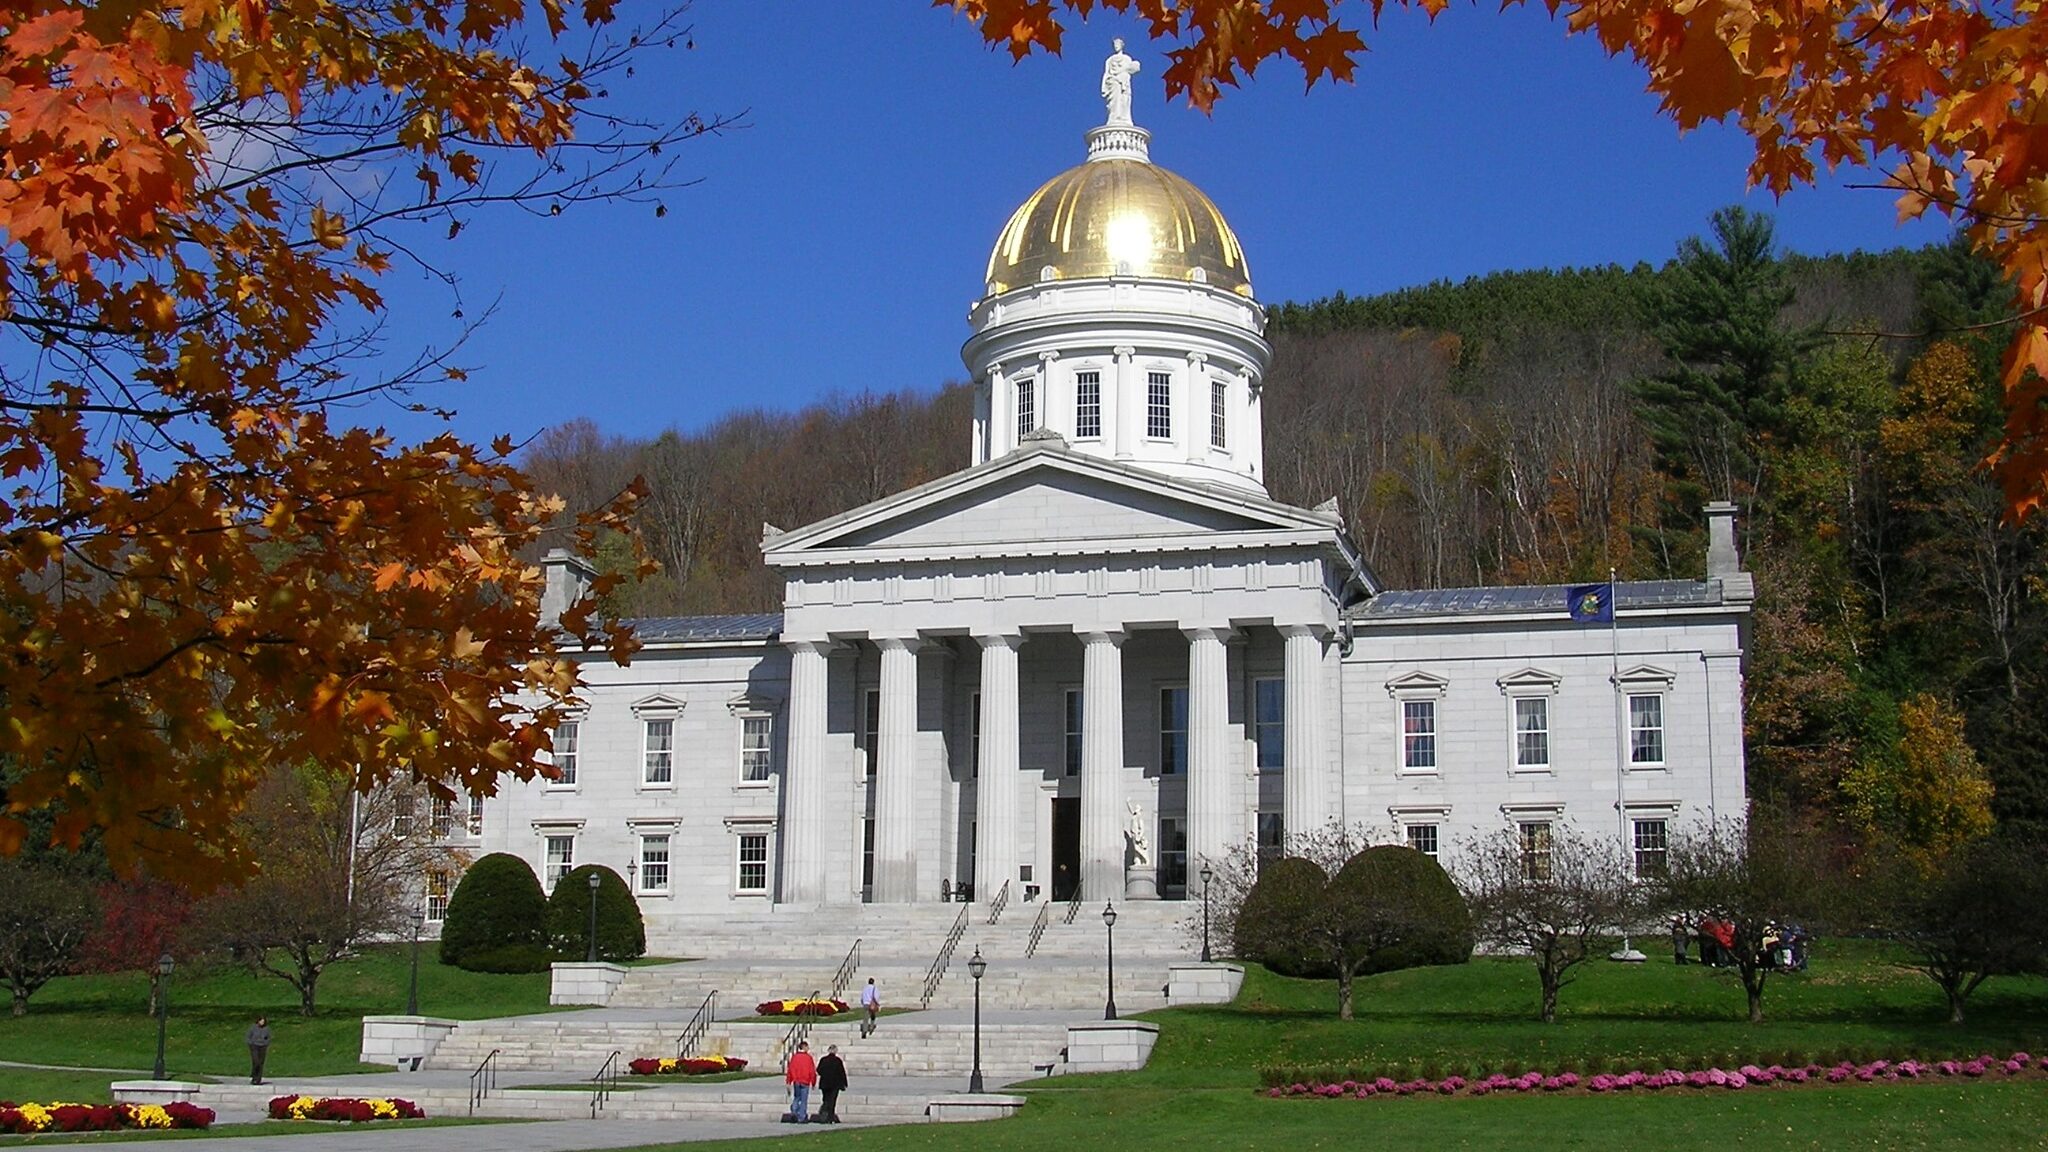 vermont-state-house-building-state-capitol-montpelier-aspect-ratio-16-9